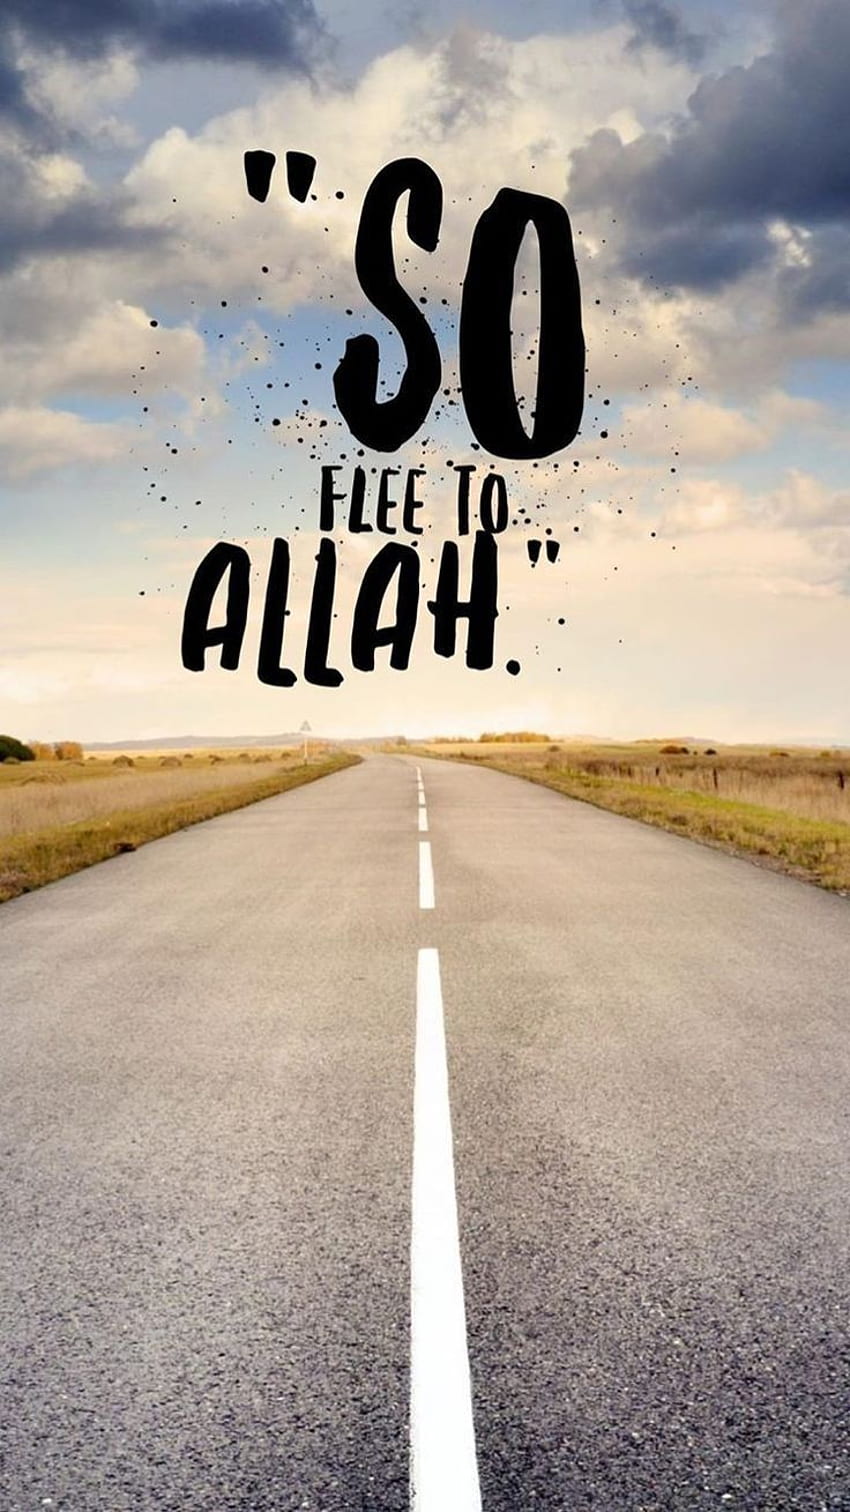 Islamic Quotes Wallpaper APK for Android  Download